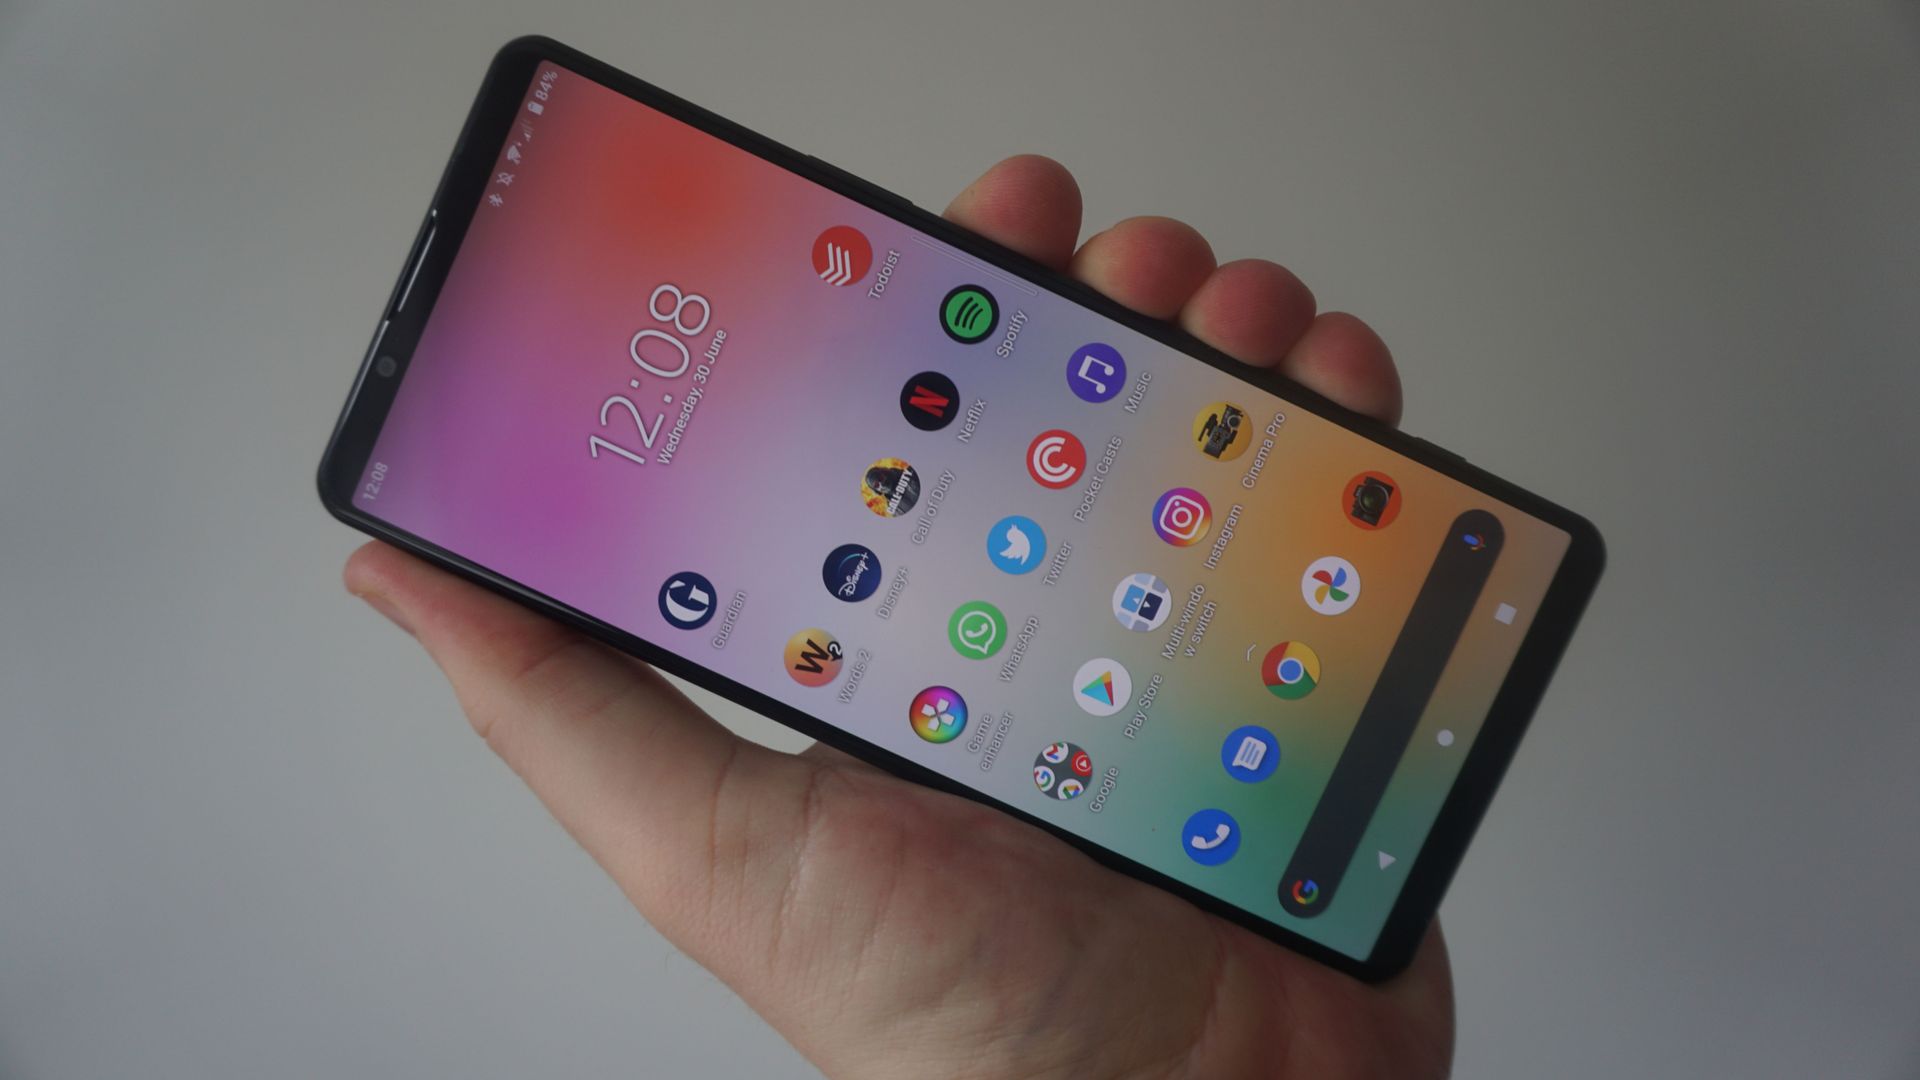 Sony Xperia 1 IV will be the best Android phone for creativity and